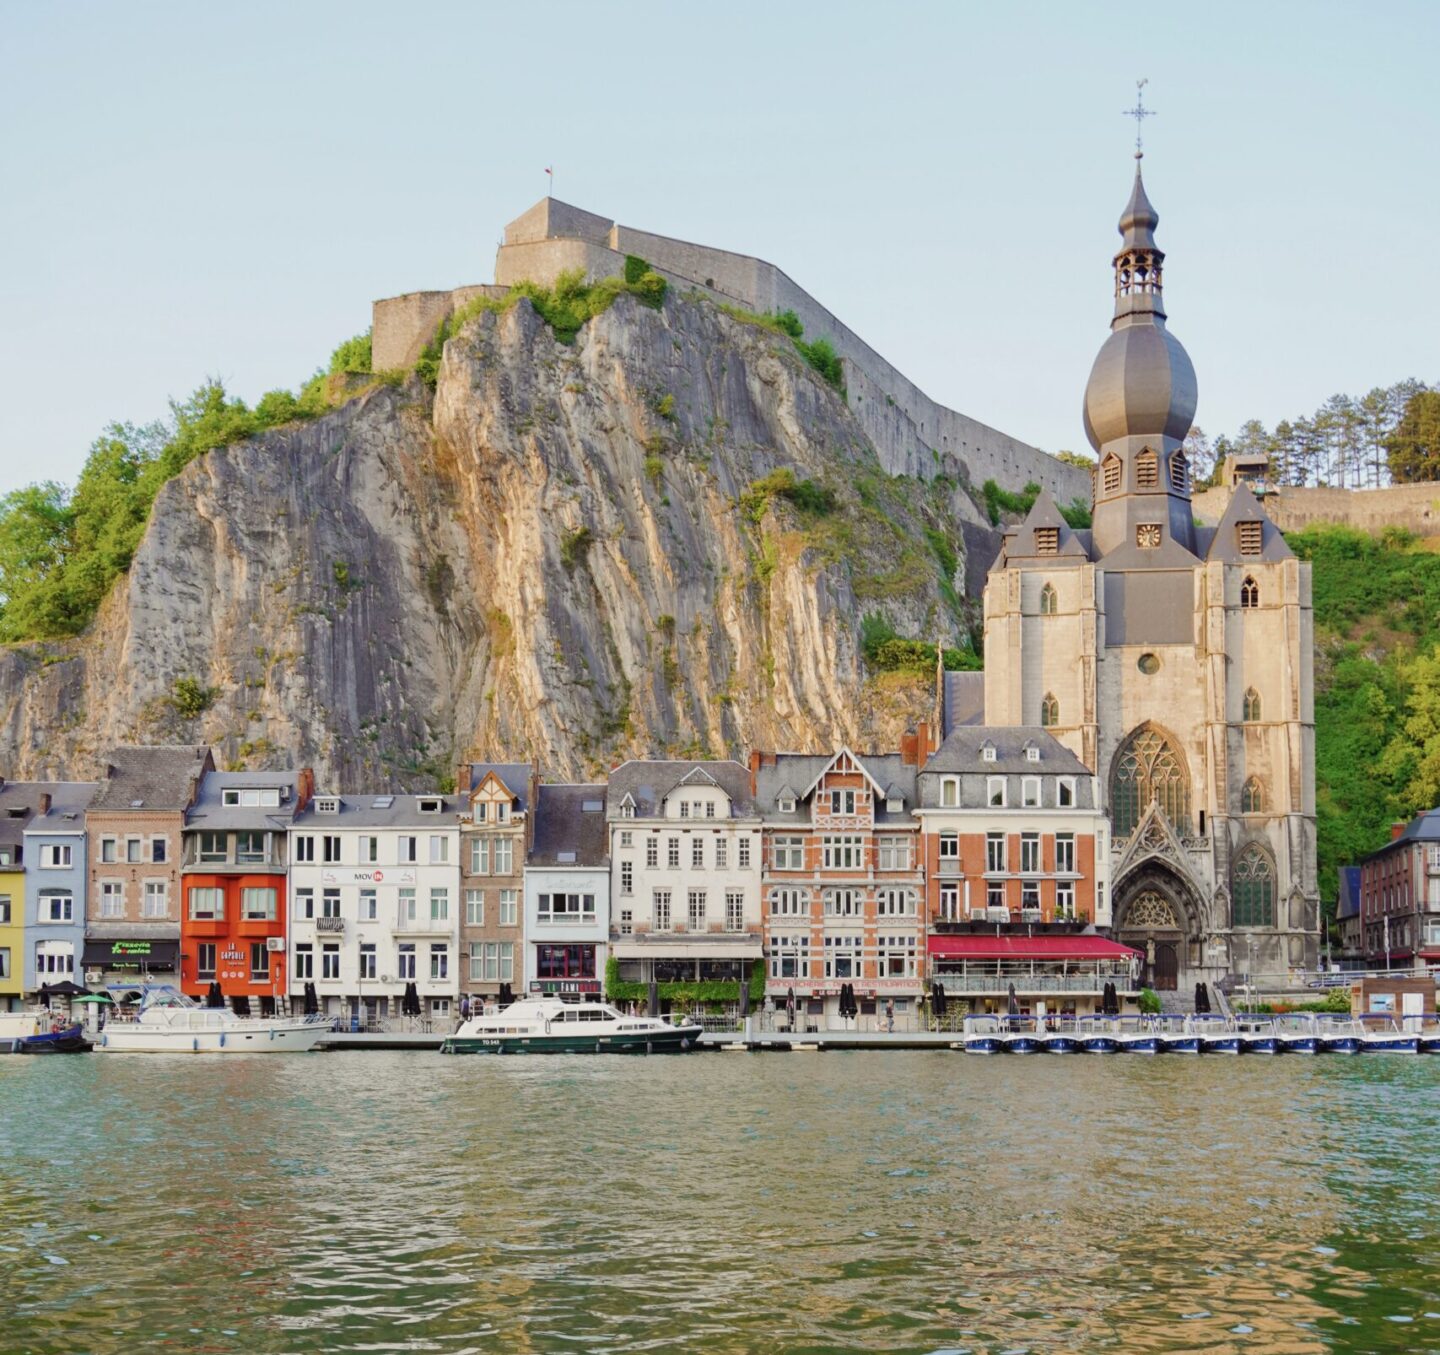 View of Dinant city in Belgium with buildings lining the river and mountain in the background.